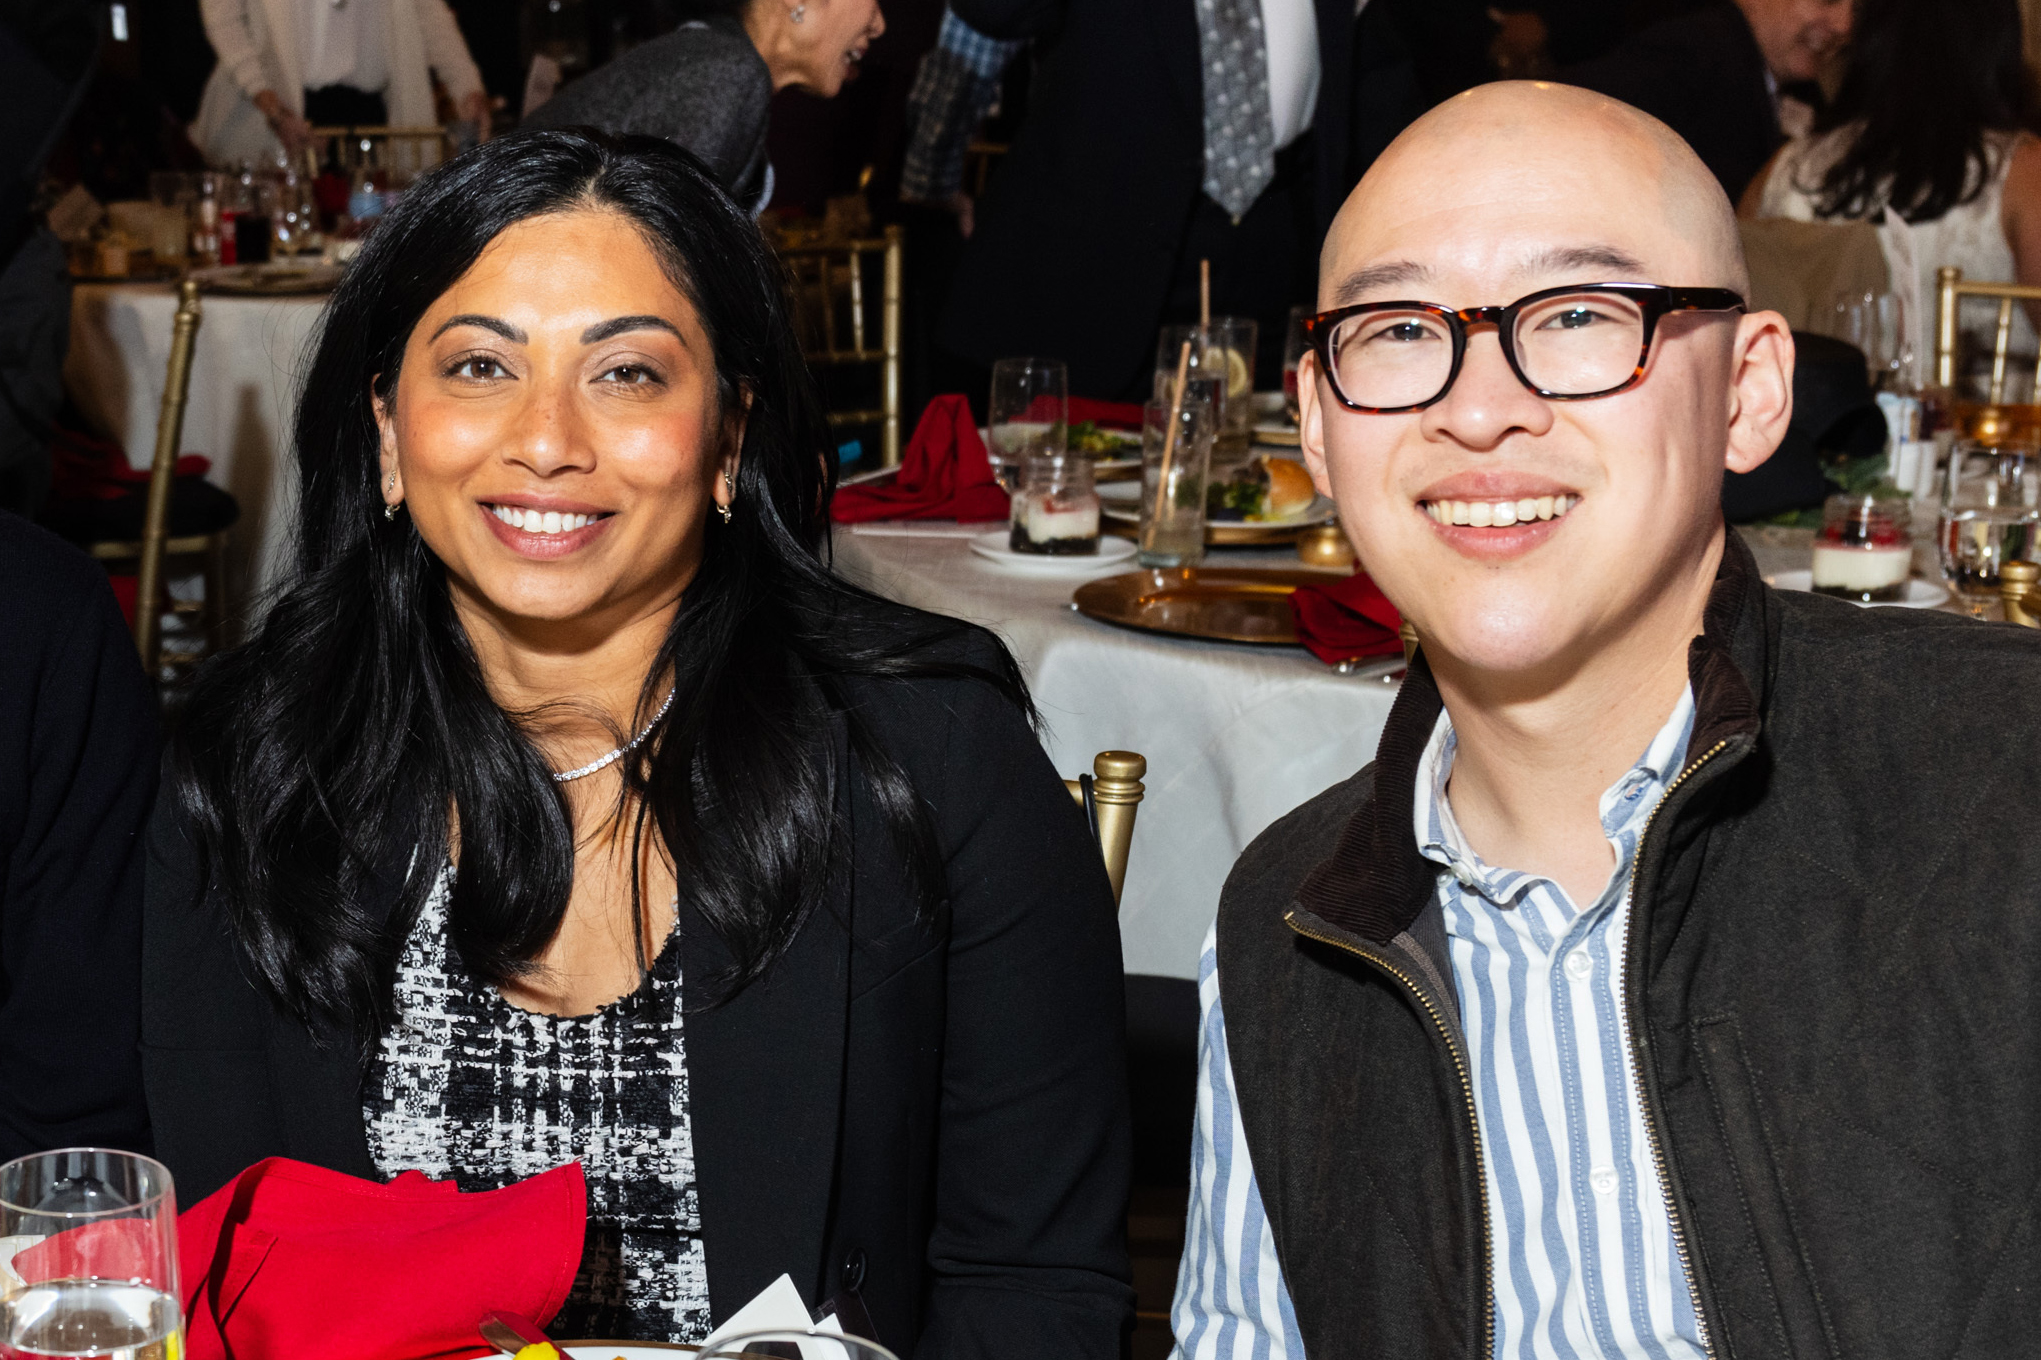 Kanishka Cheng and Jay Cheng both smile while seated at a festive table with dinnerware, both dressed semi-formally.